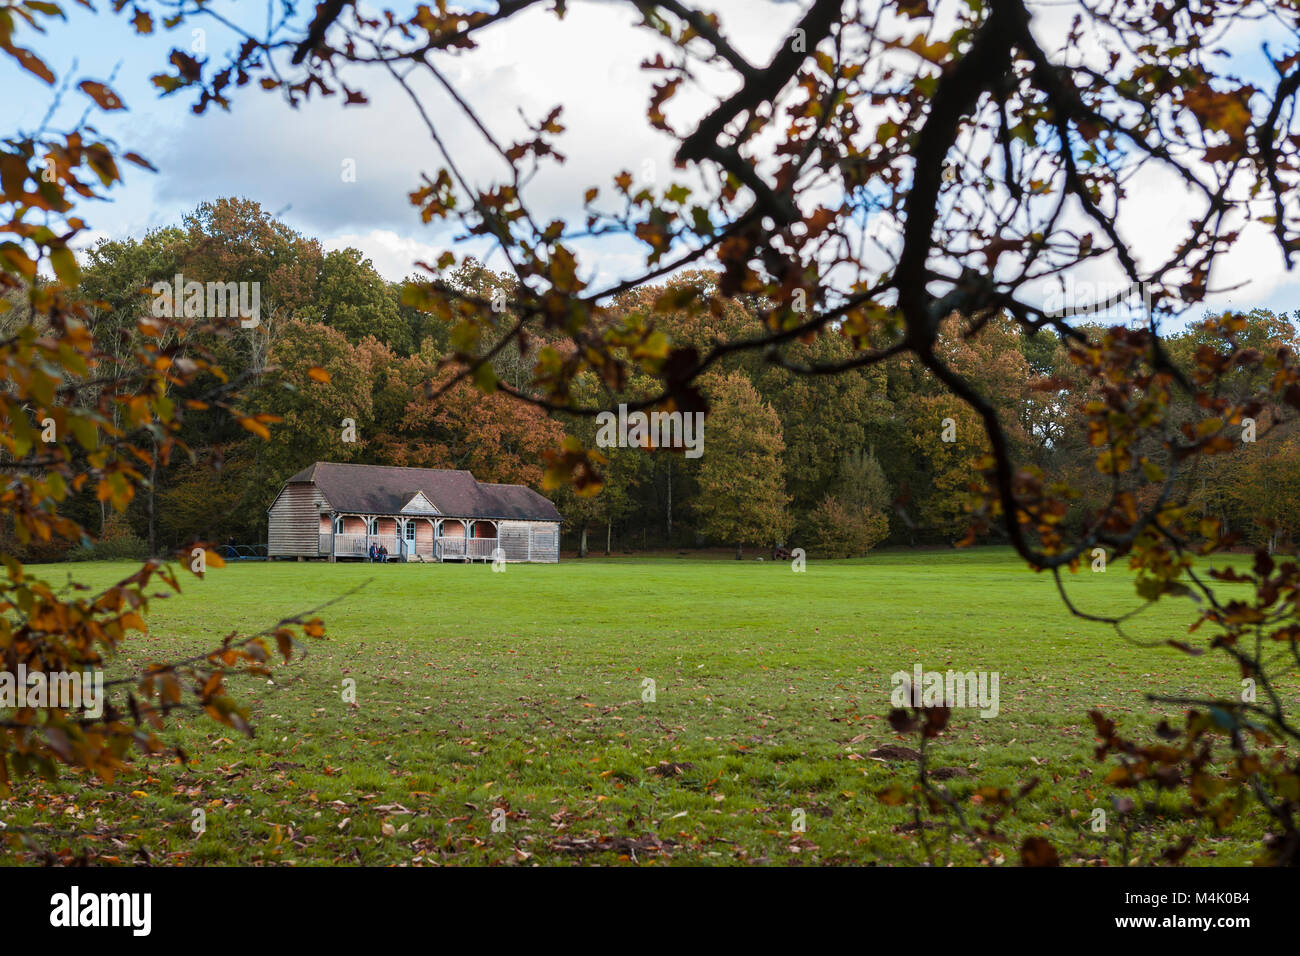 The cricket pitch and pavilion, Sheffield Park, Uckfield, East Sussex, England Stock Photo